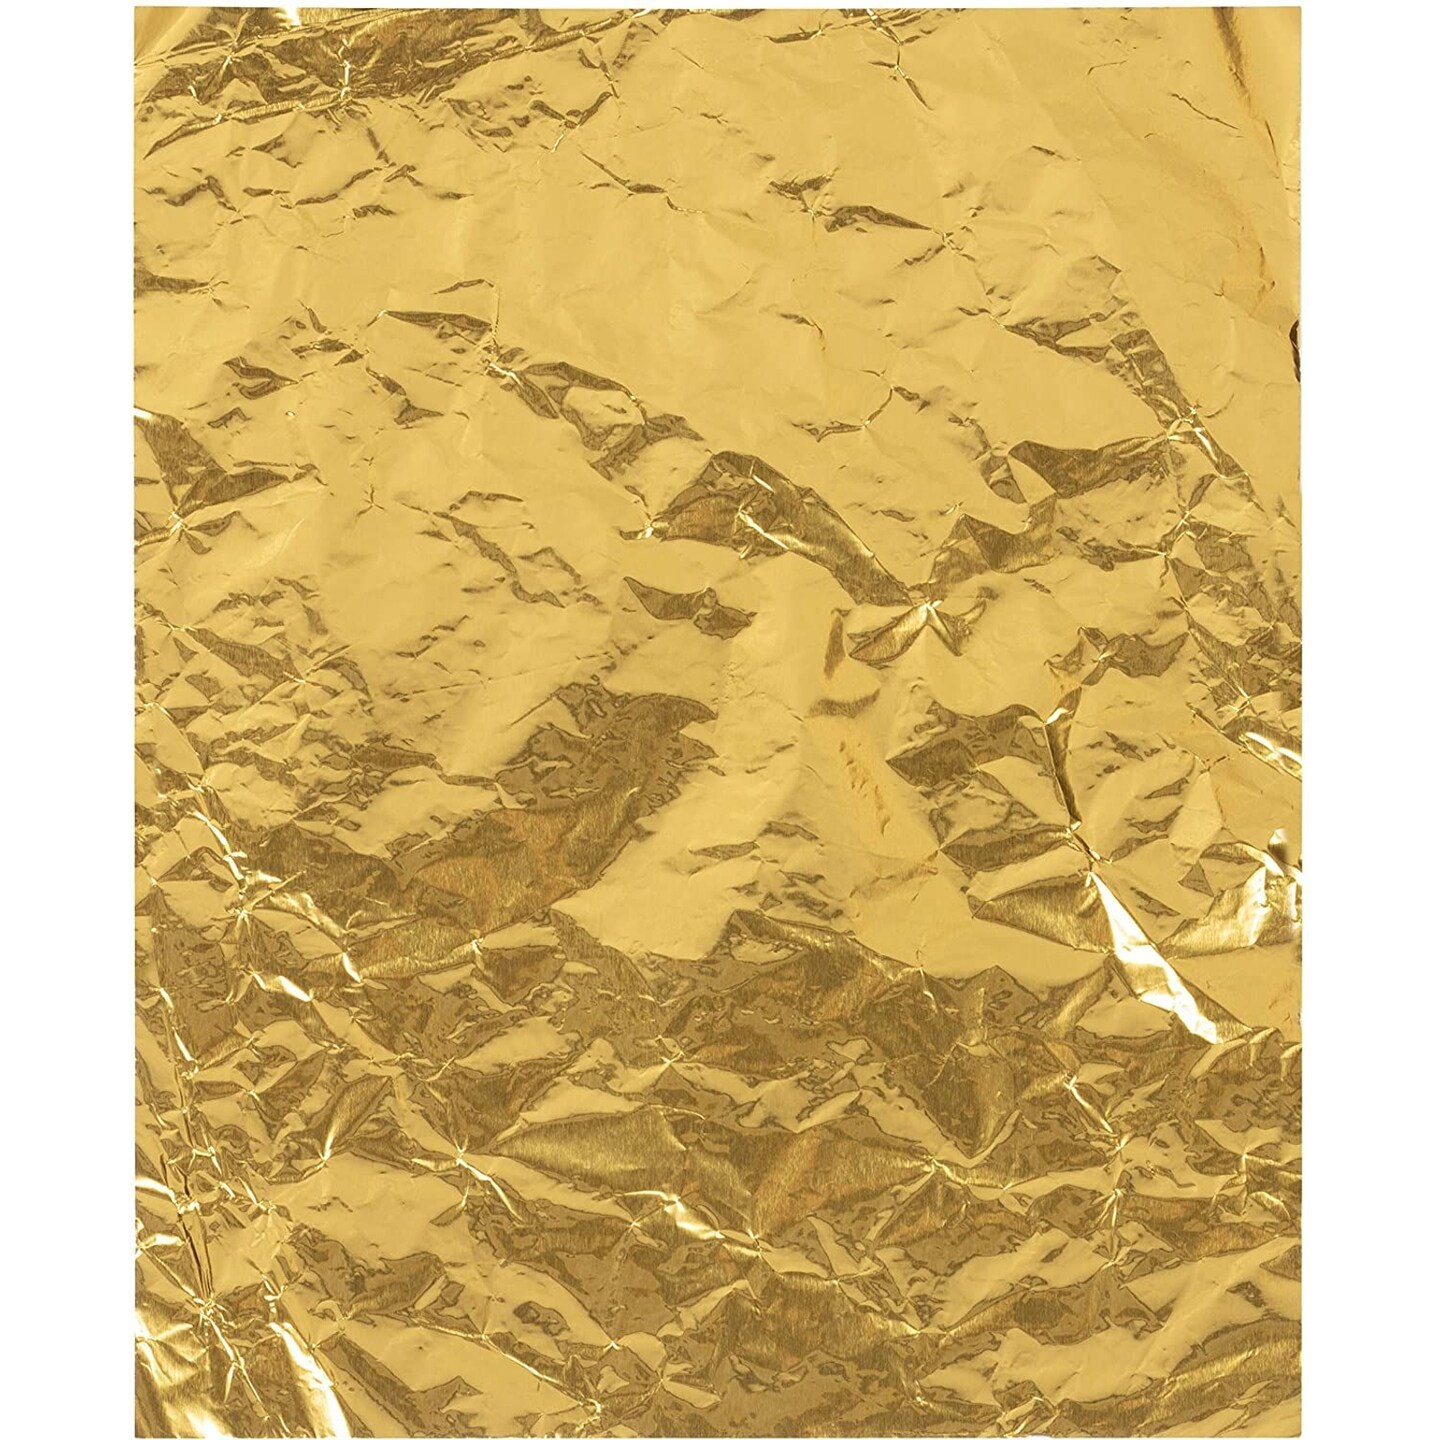 Buy Chocolate Foil Wrapper - Large Size - Embossed Pattern Gold